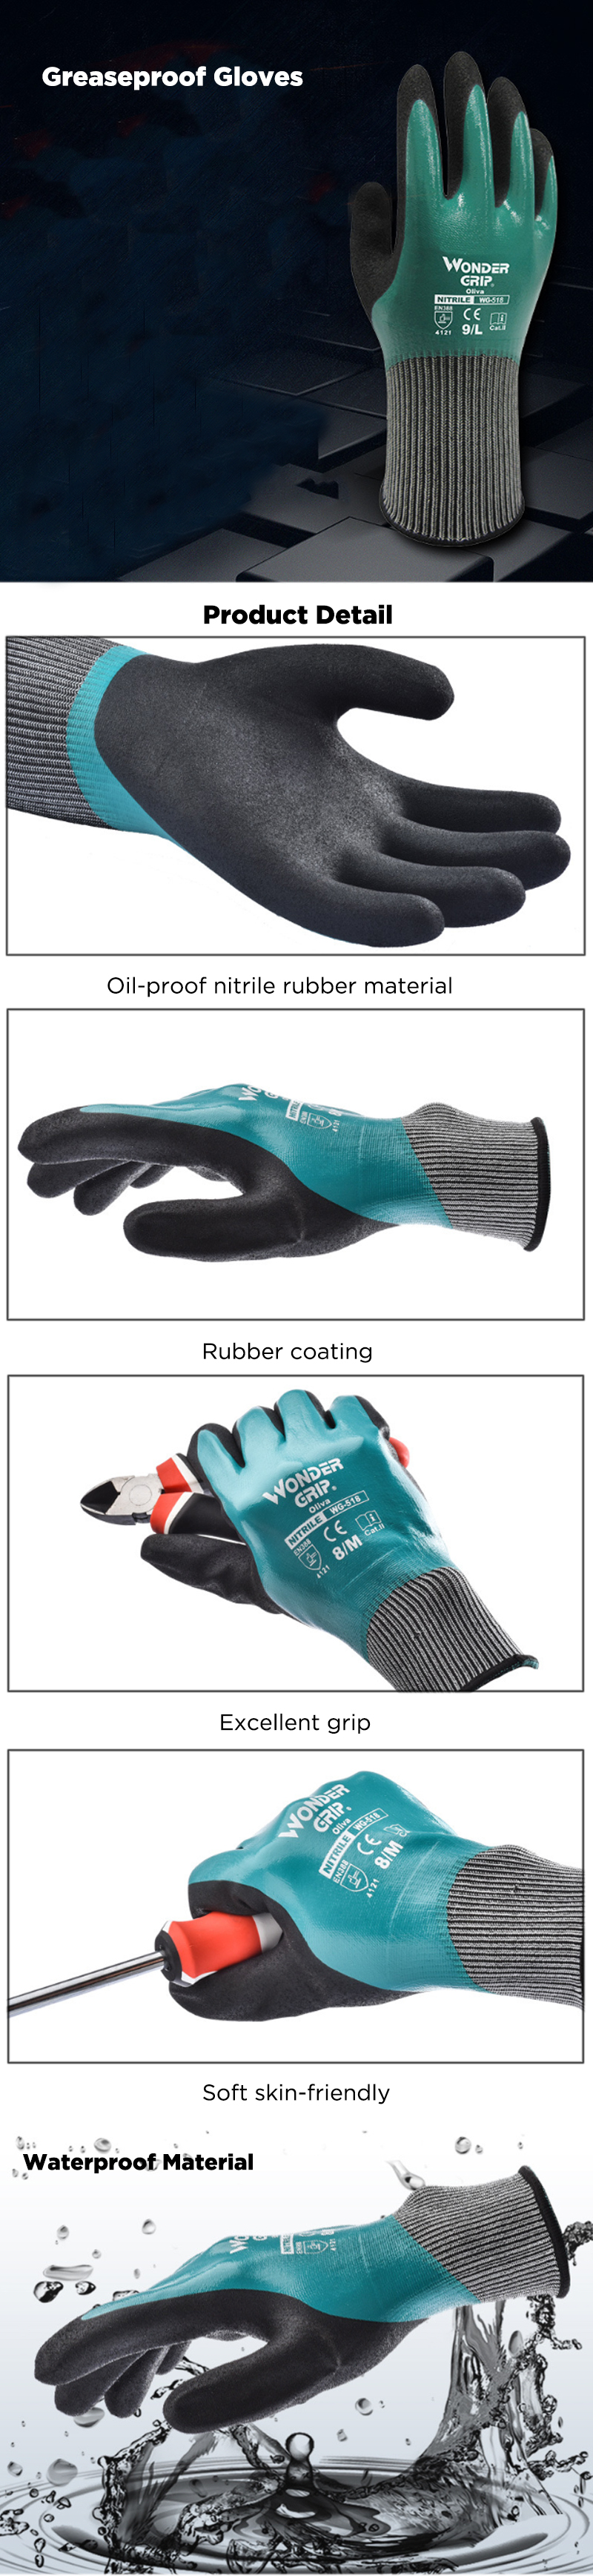 Wondergrip-1-Pair-Rubber-Gloves-Heat-Resistant-Barbecue-BBQ-Grill-Gloves-Oven-Baking-Cut-proof-Cooki-1654531-1